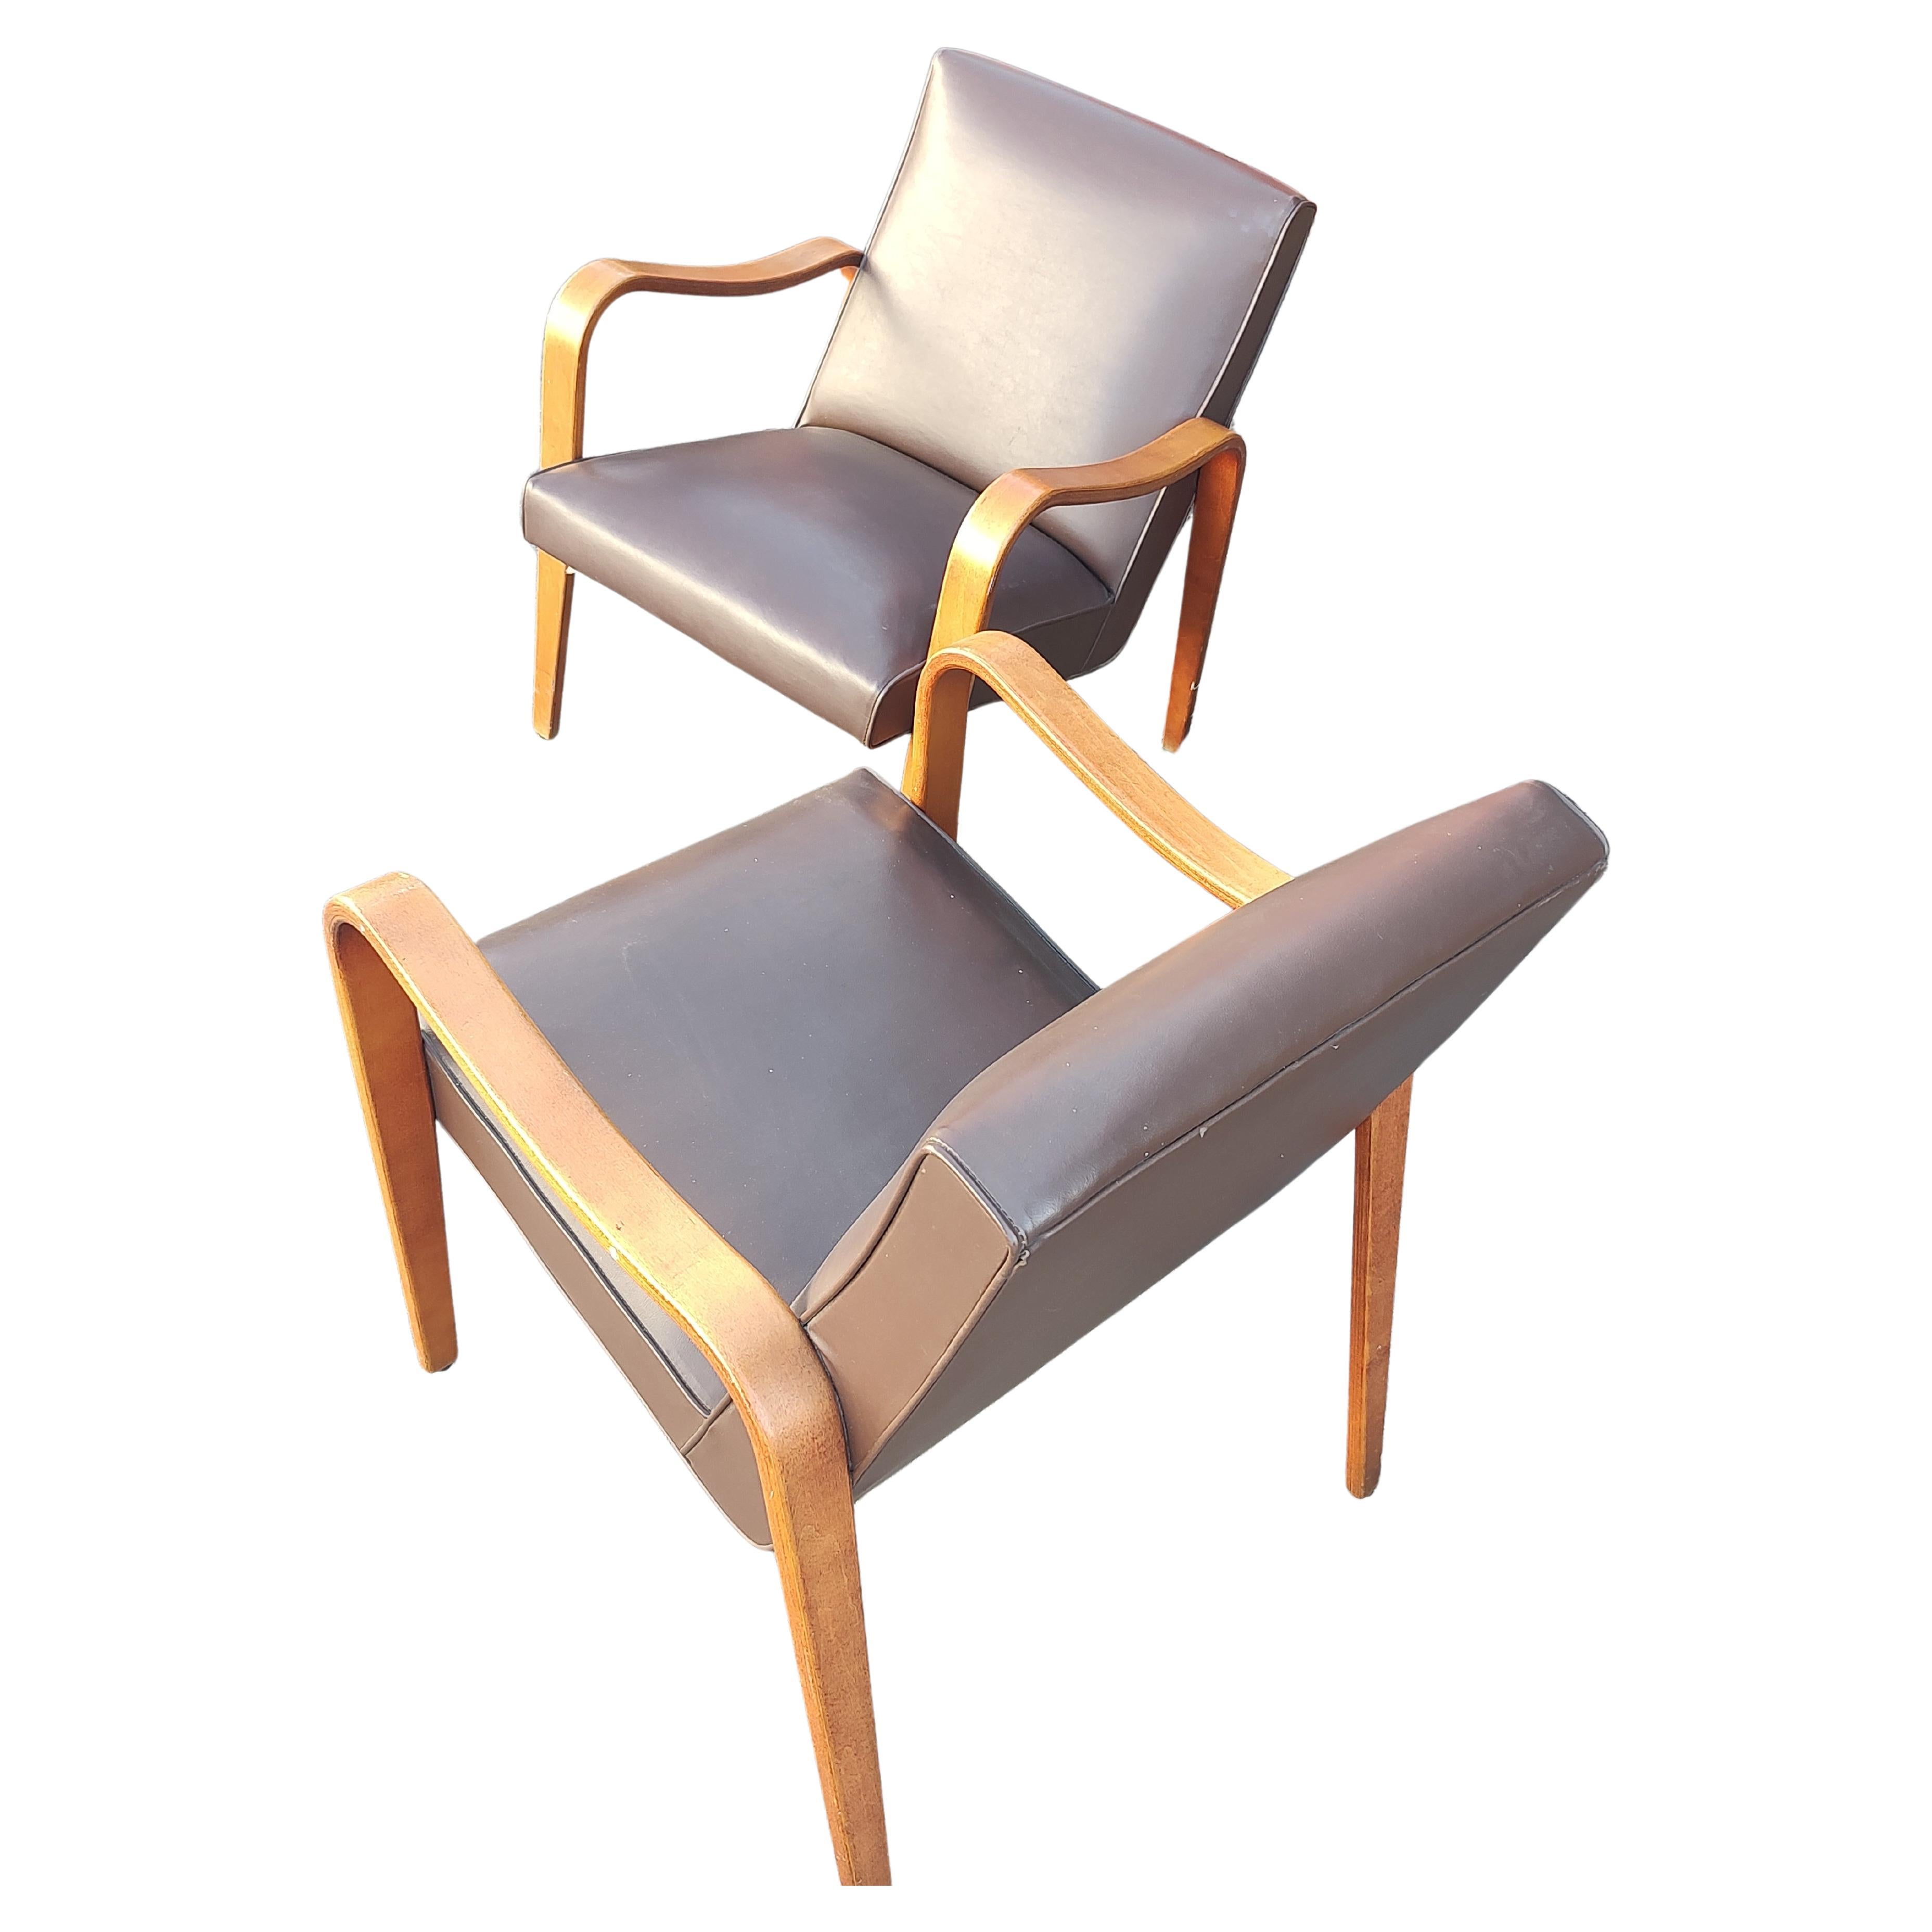 Hand-Crafted Mid Century Modern Sculptural Bent Arm Lounge Chairs in Birch by Thonet For Sale